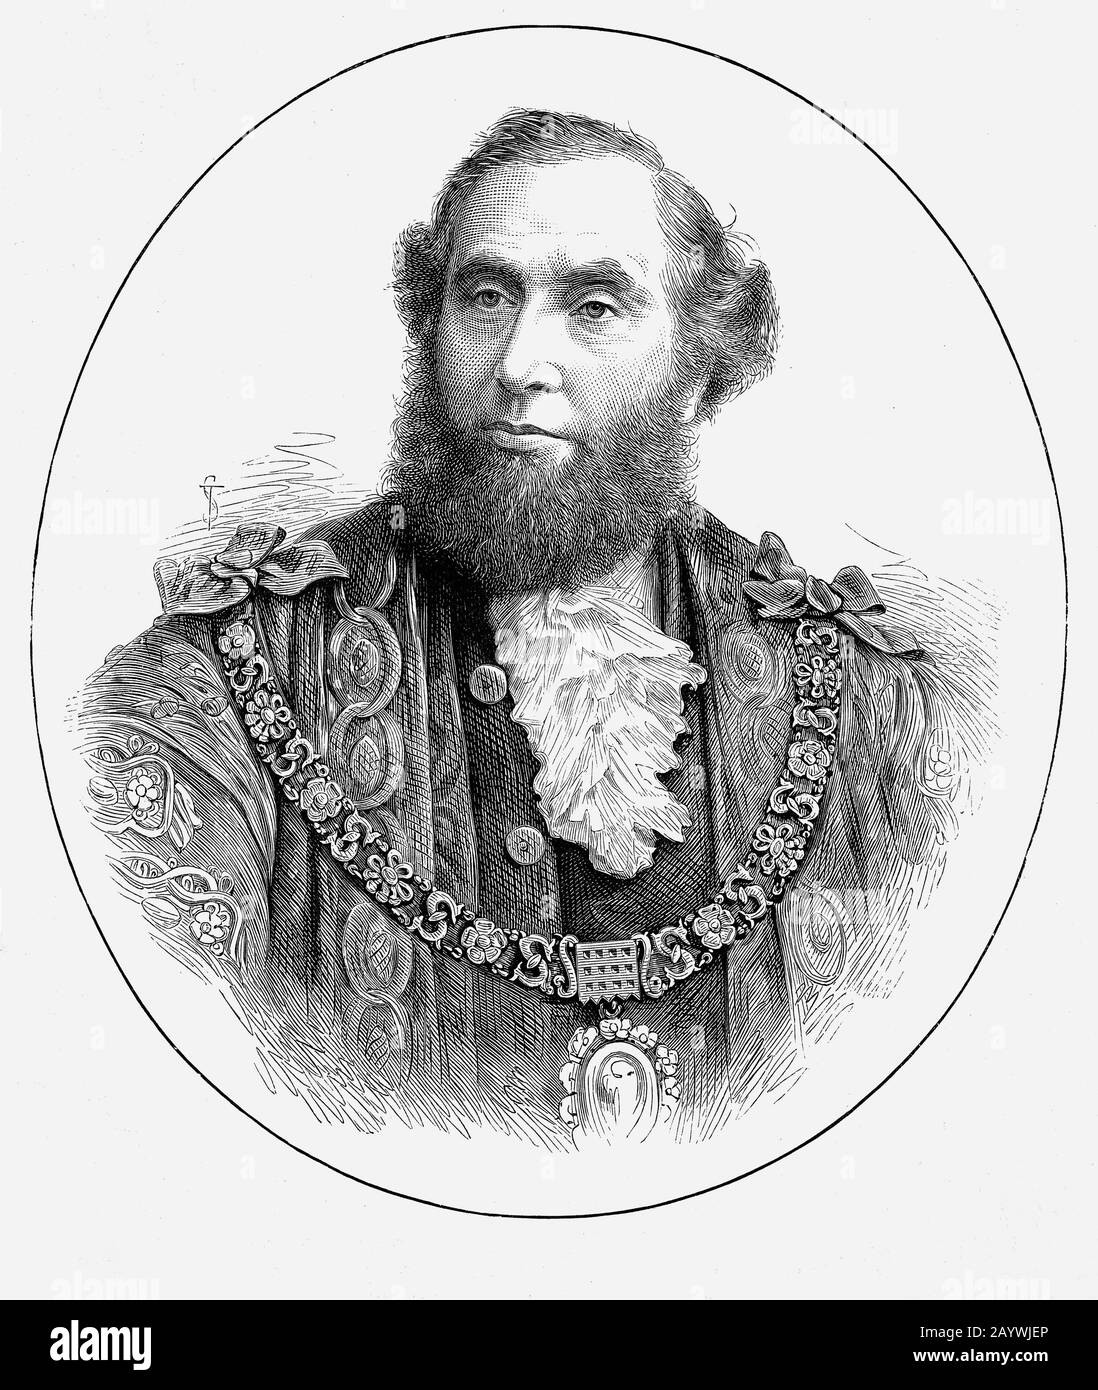 Sir John Whittaker Ellis (1829-1912), Lord Mayor of London for 1881-1882 in which year he was made a baronet. Two years later he was elected and re-elected Conservative Member of Parliament for eight years, not seeking further re-election. A very prosperous banking executive, estate agent and auctioneer among his legacies was a fire station at Byfleet, Surrey; he sat on the boards of various hospitals and his wife was also engaged in charities. Stock Photo